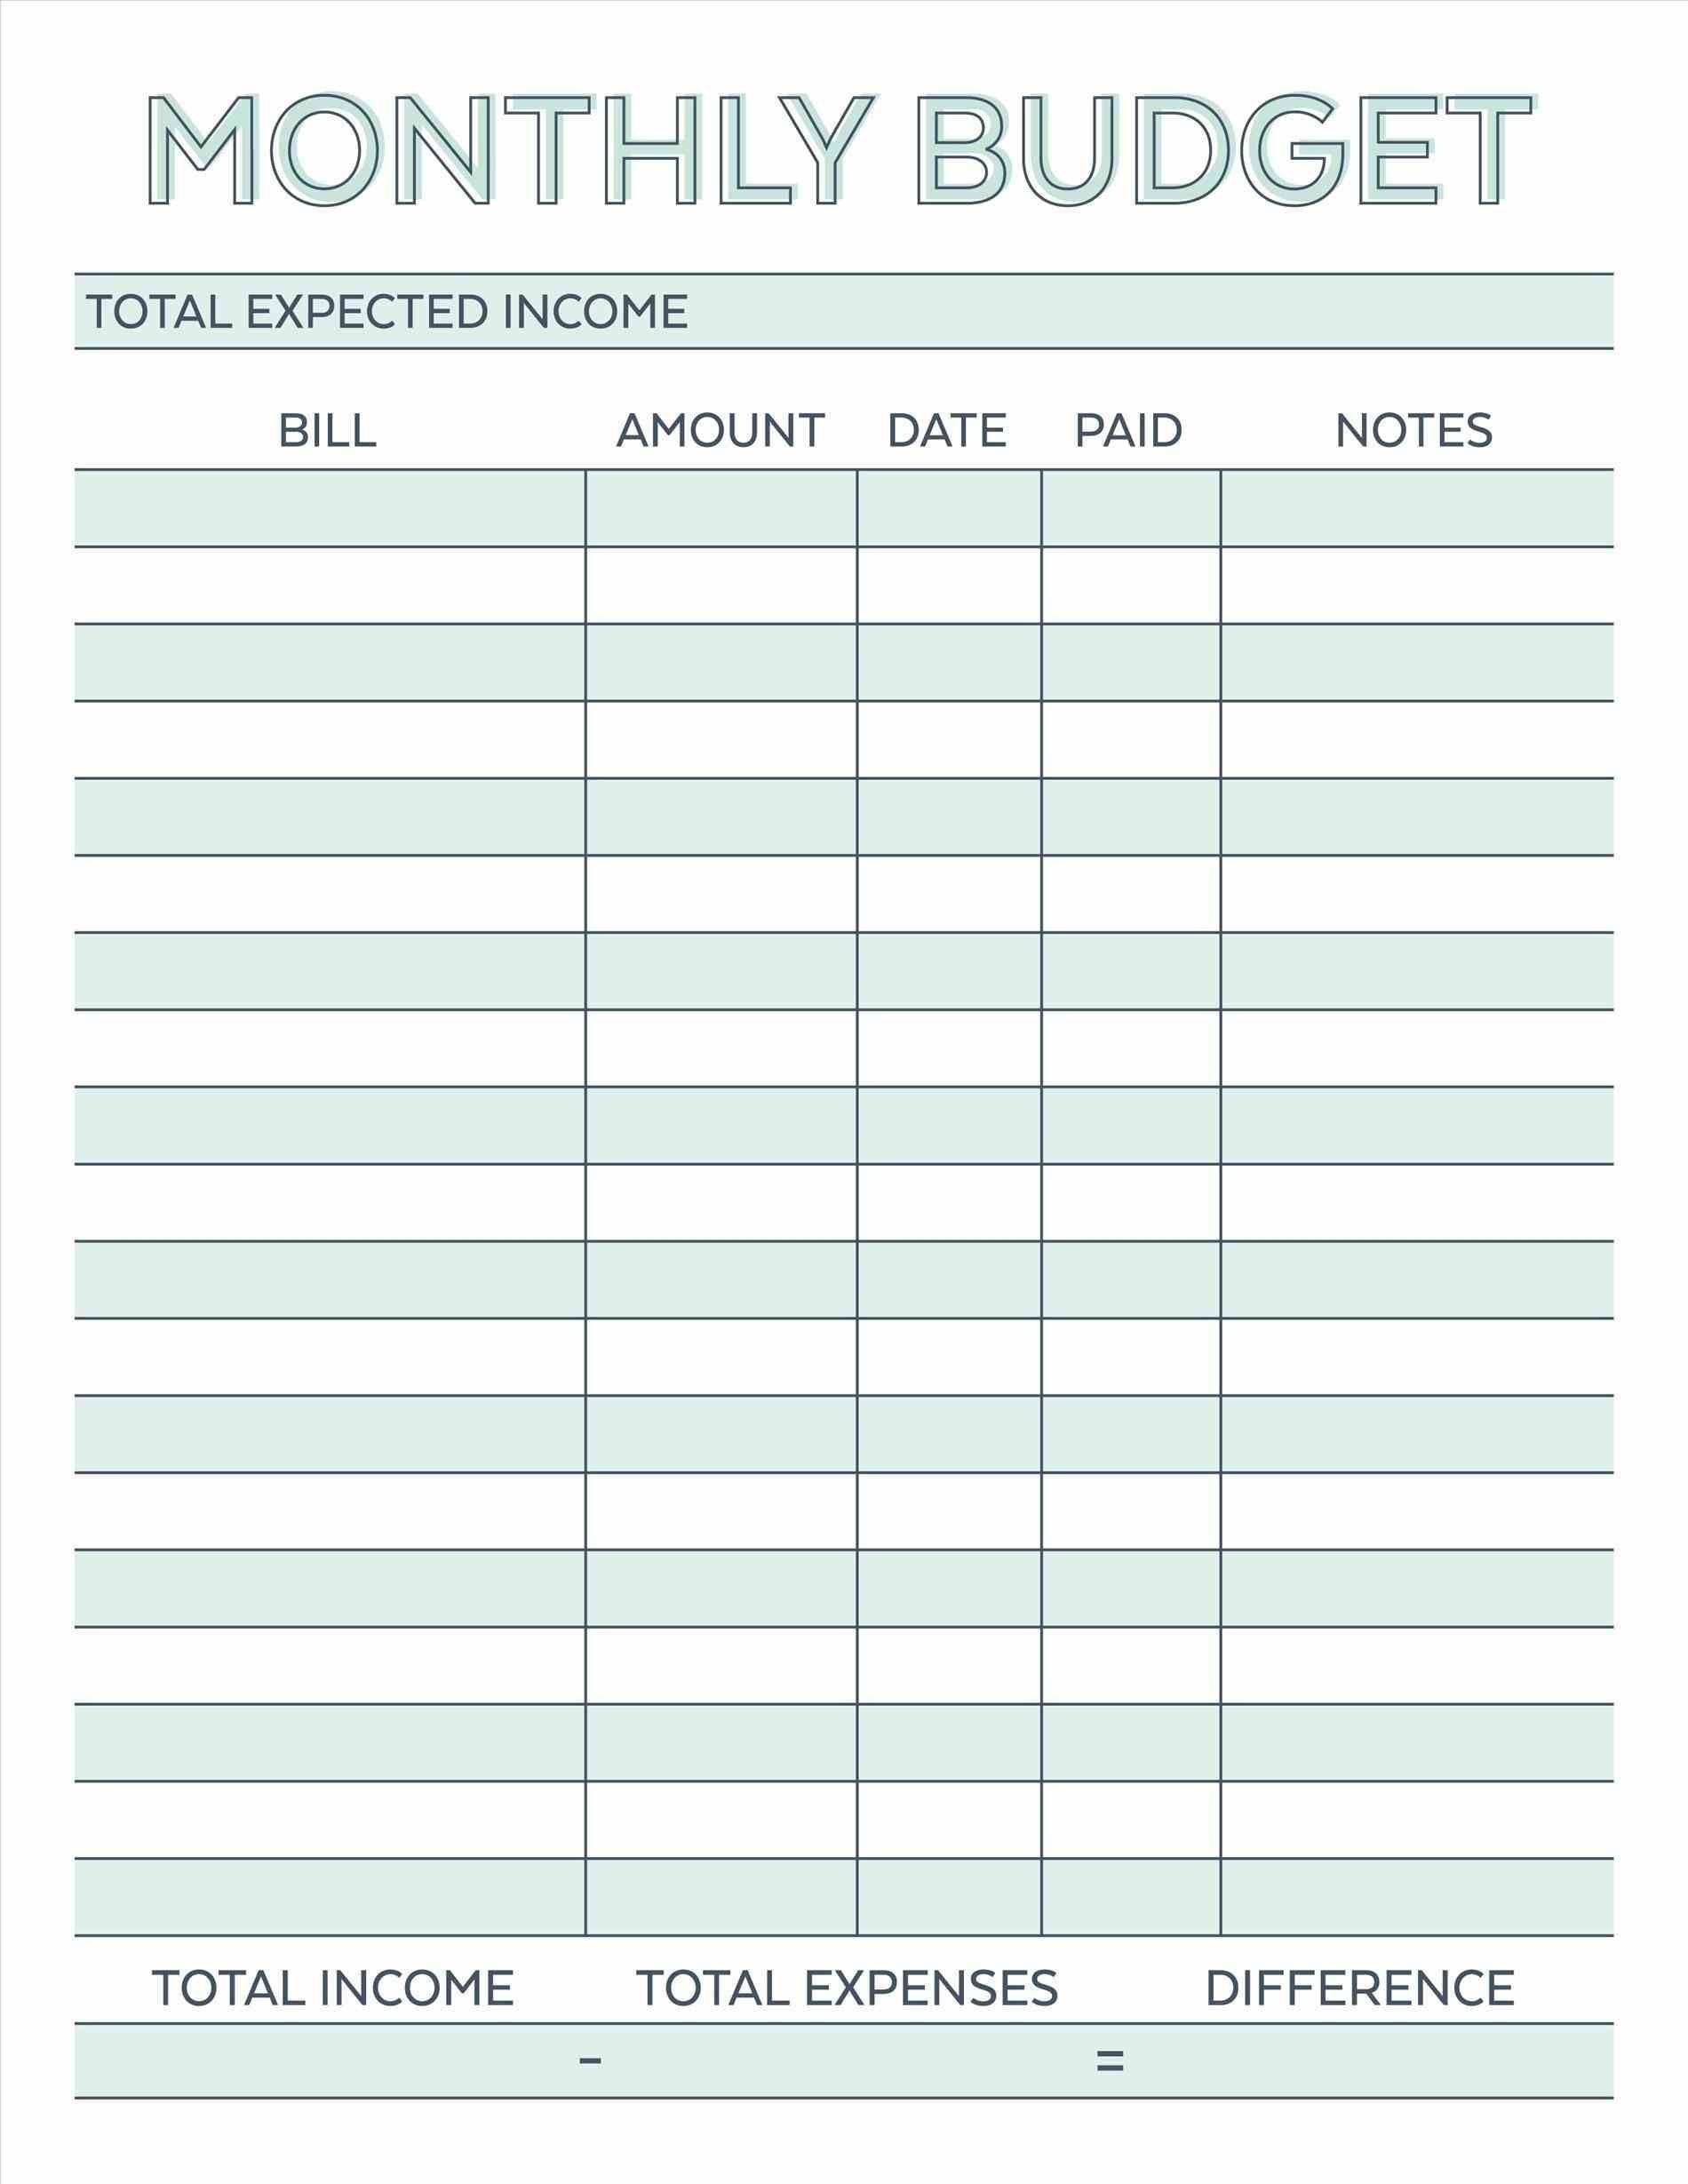 Budgetr Worksheet Monthly Bills Template Free Personal Spreadsheet pertaining to Printable Monthly Bill Paying Worksheet